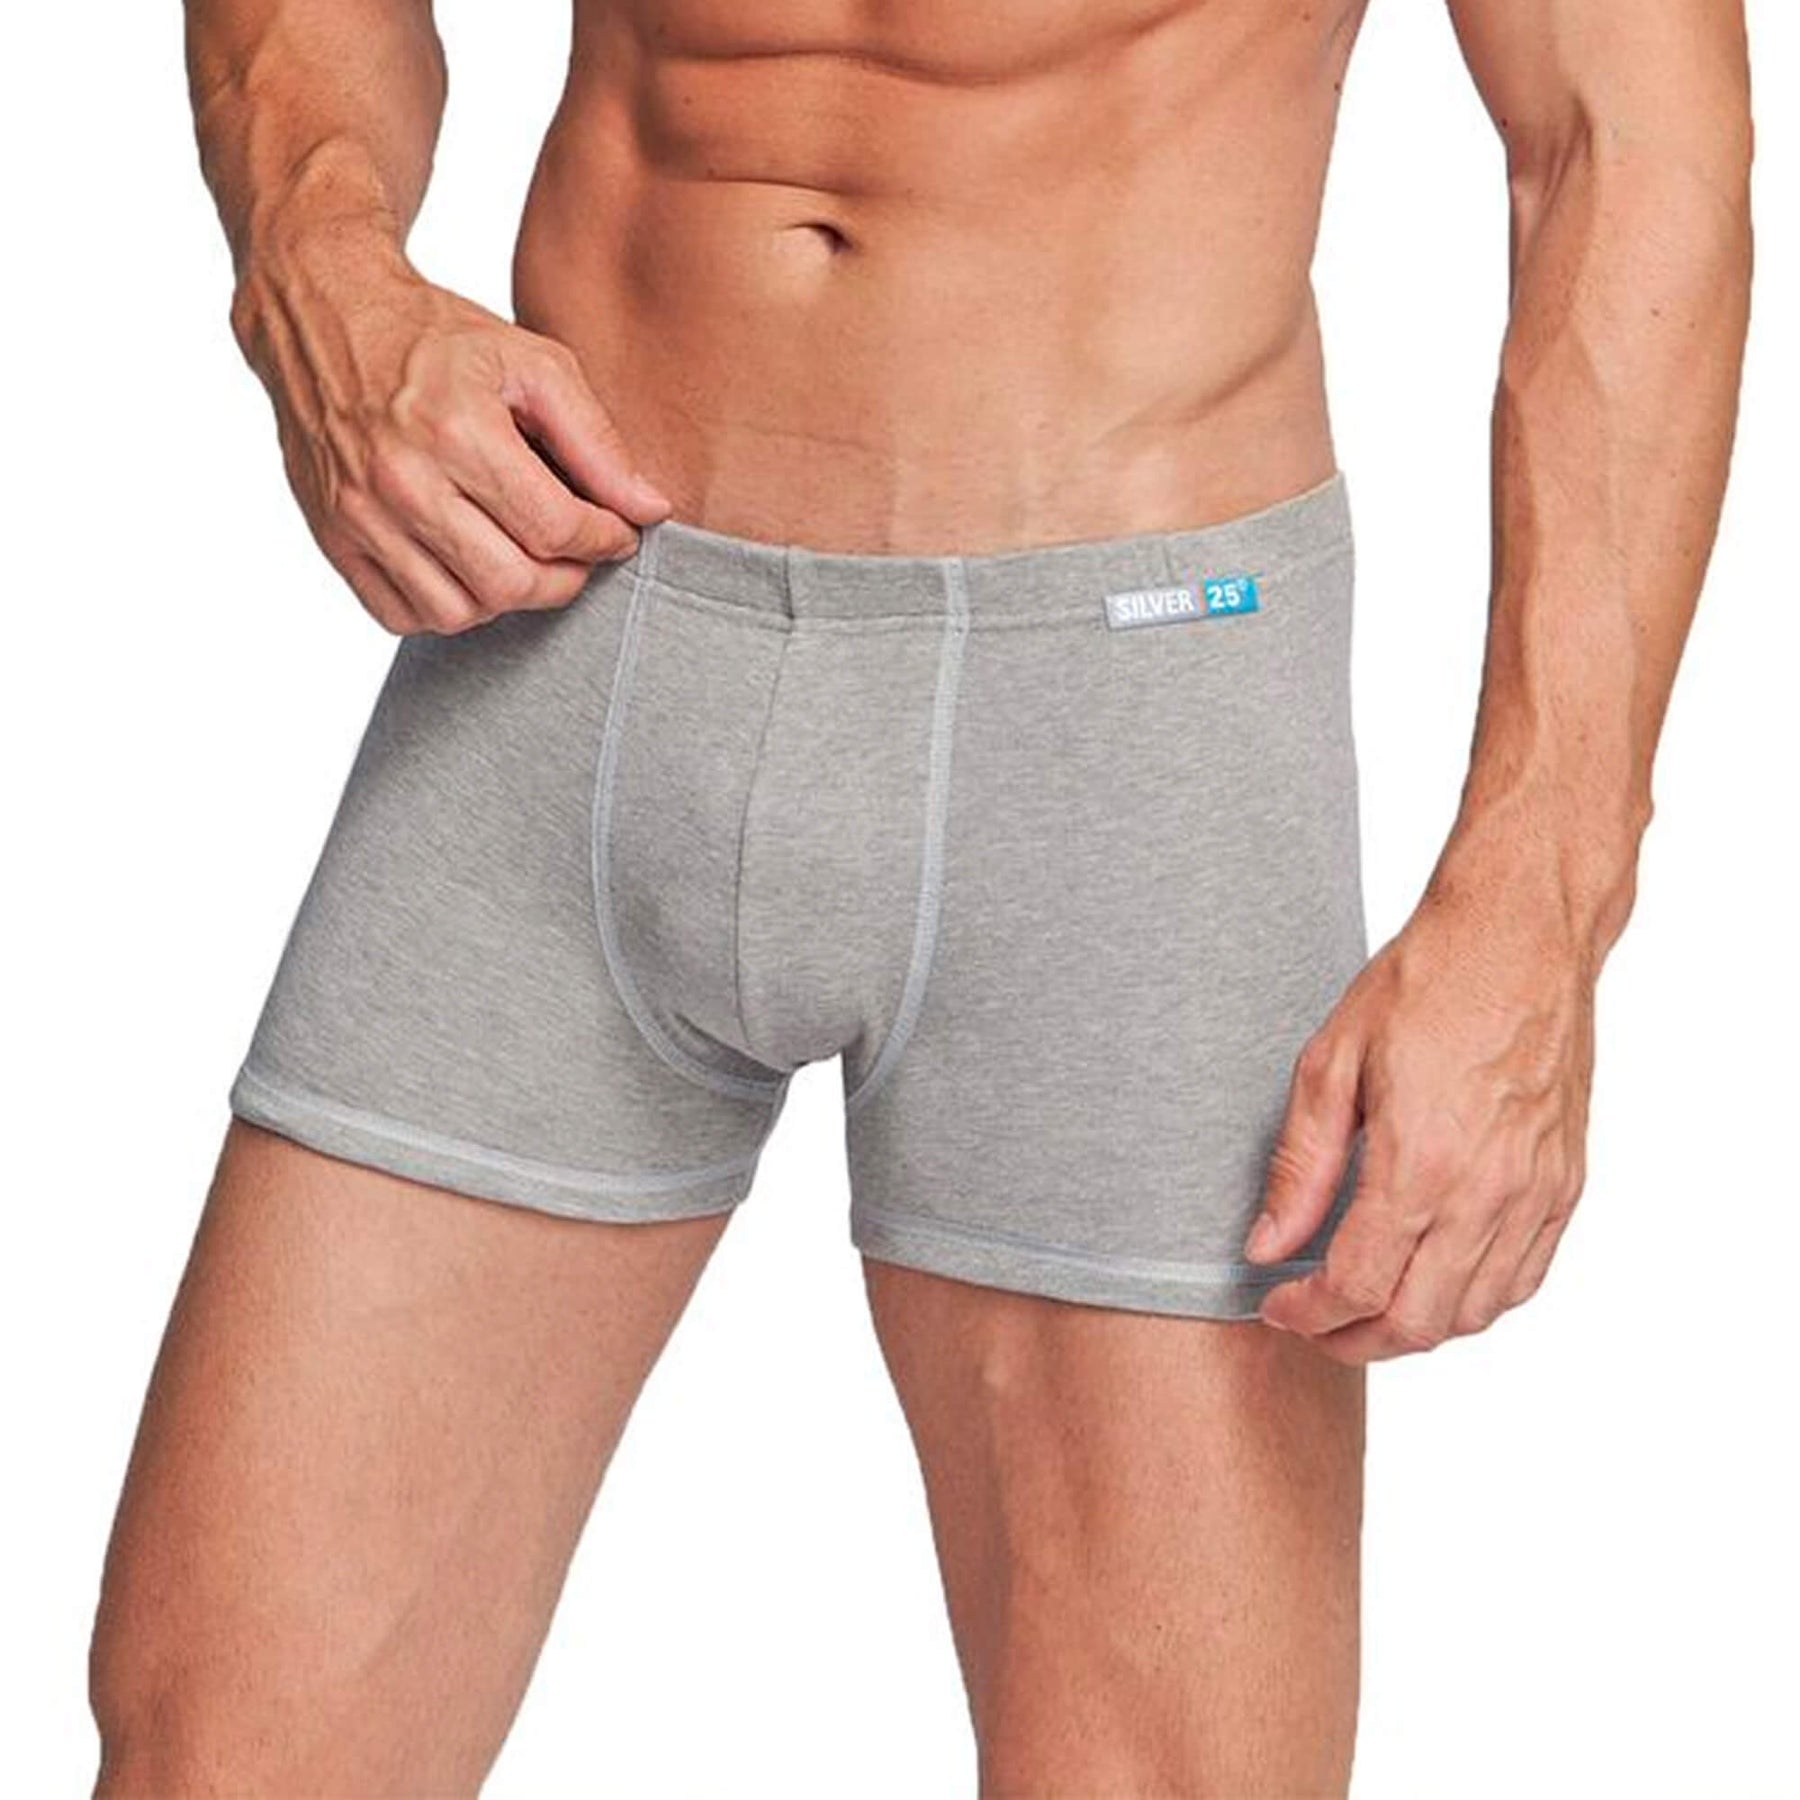 Review: SILVERLINING Alpha silver-infused briefs block EMFs